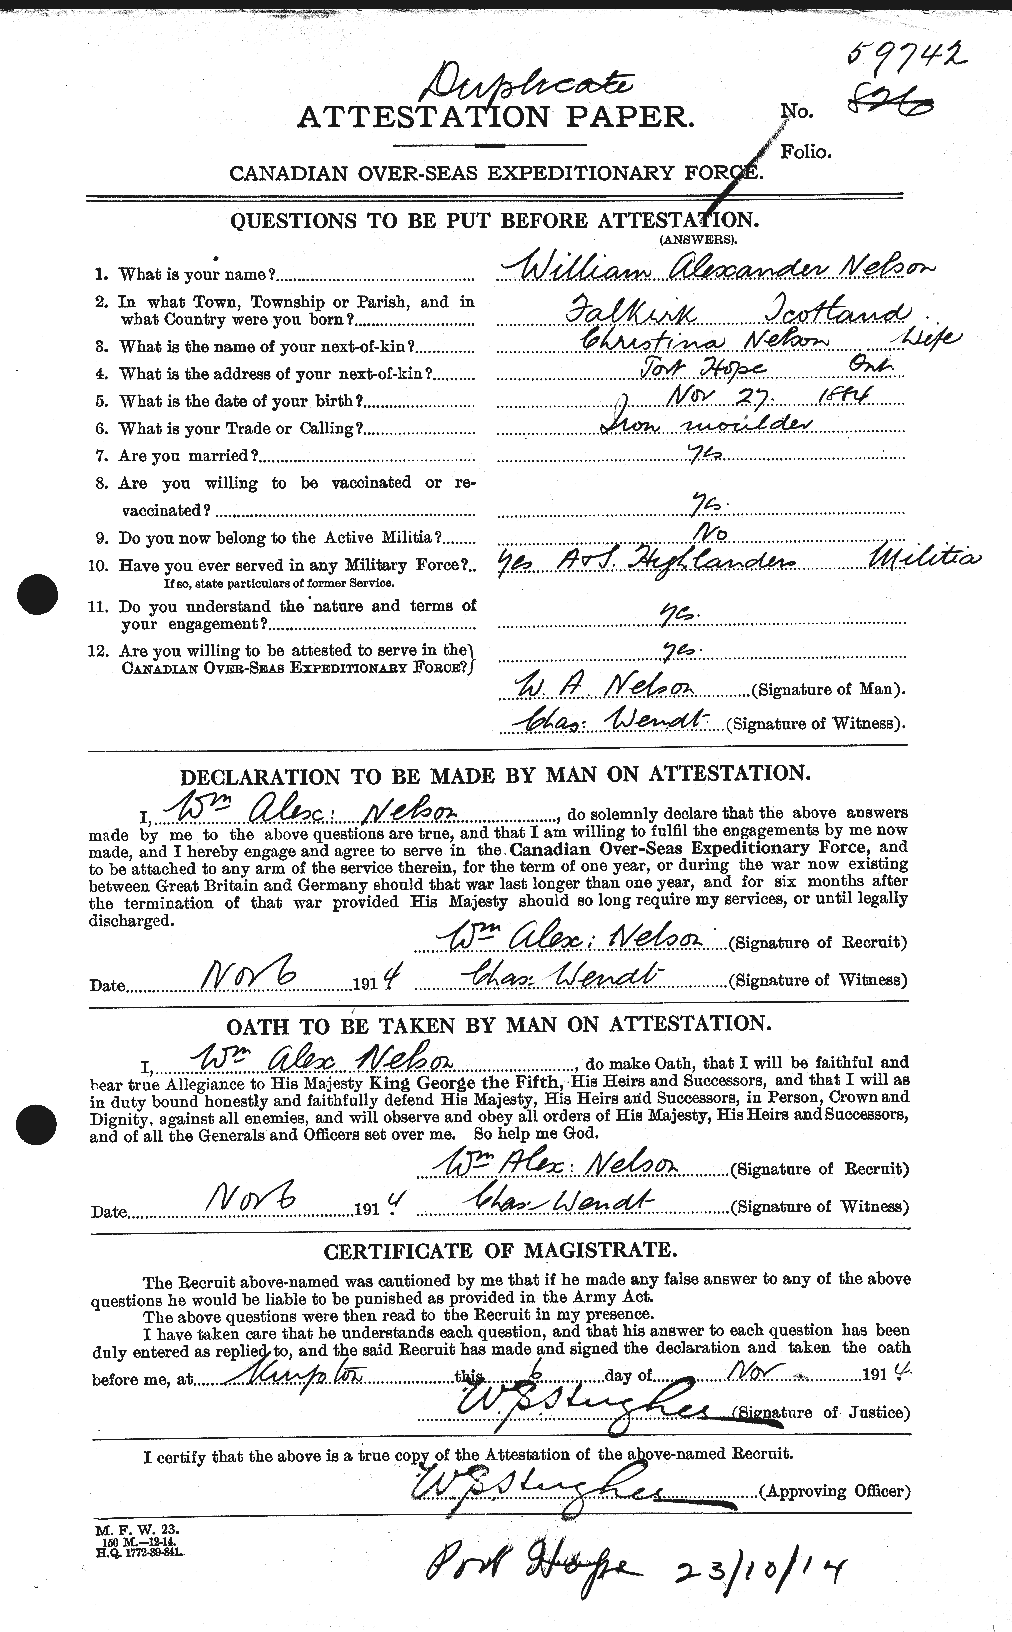 Personnel Records of the First World War - CEF 546614a